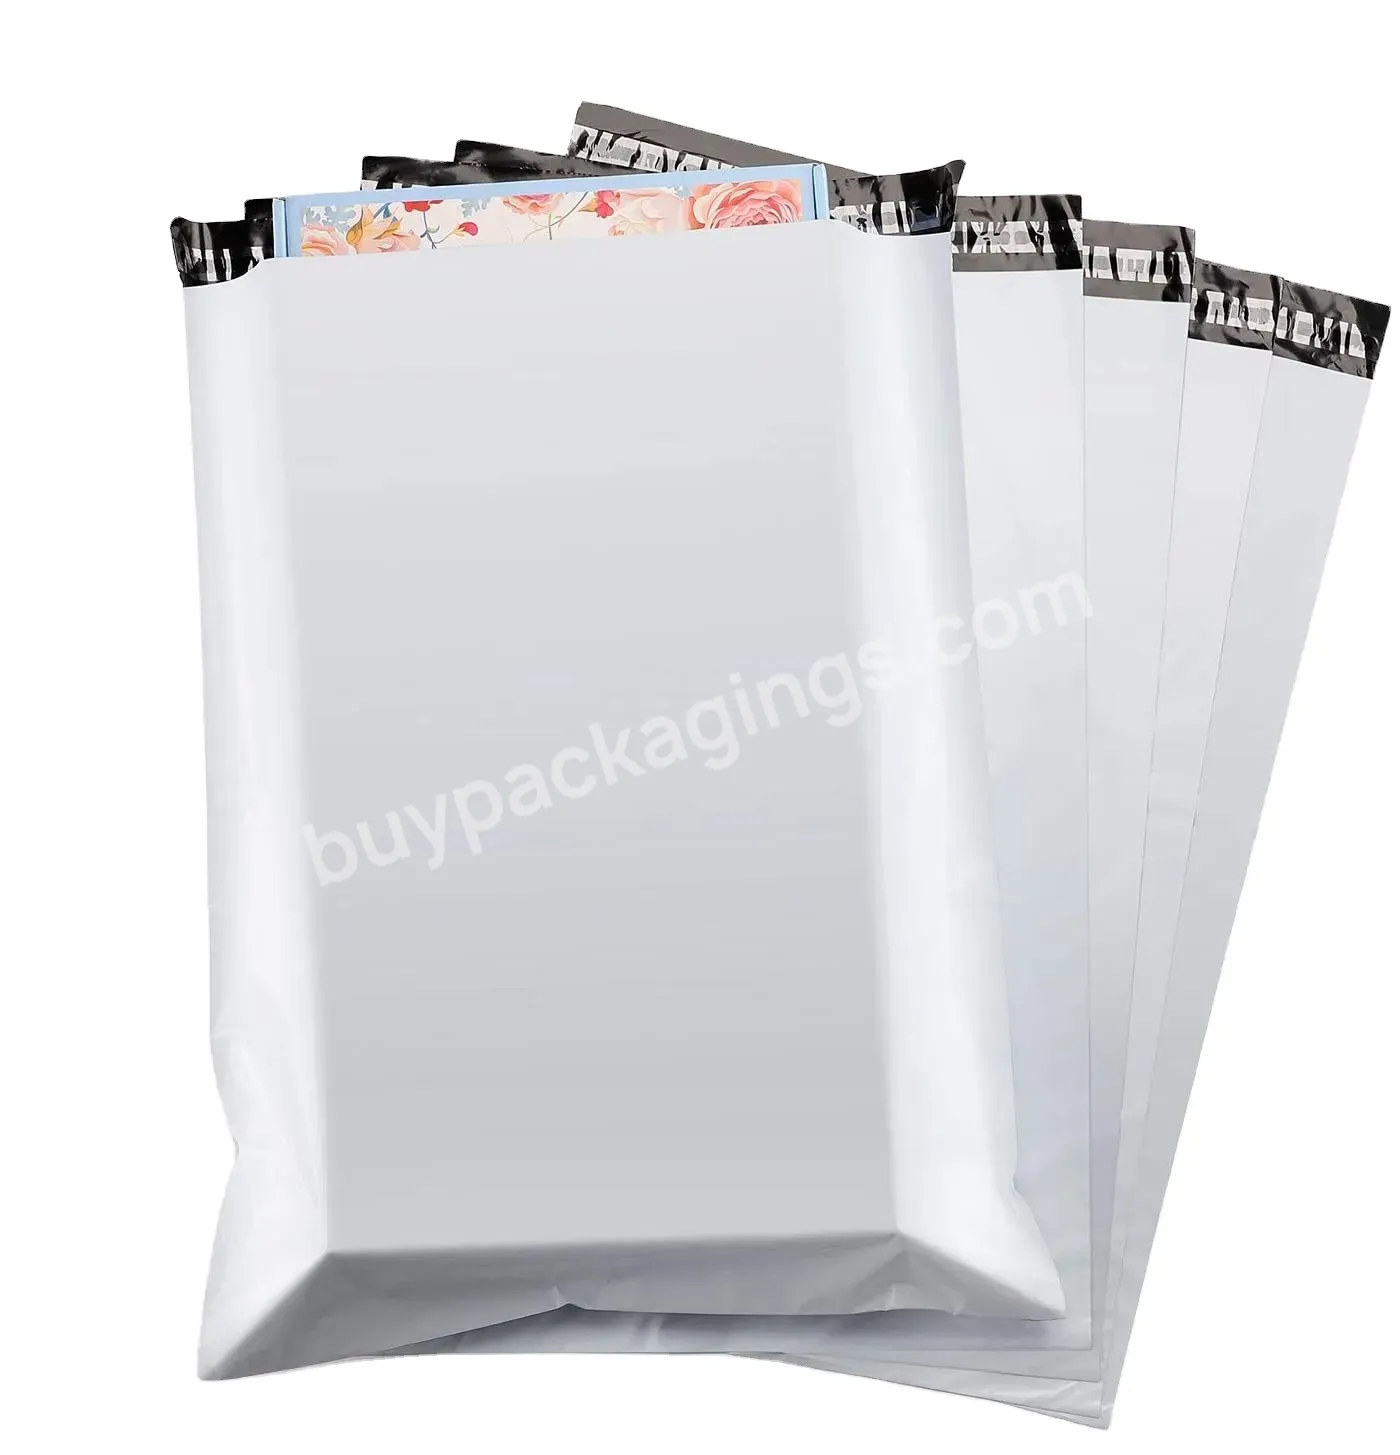 Designer Poly Mailers Wholesale Custom Poly Mailer Bags Poly Mailing Bags Compostable Packaging Branded Polybag - Buy Compostable Packaging,Custom Poly Mailer Bags Poly Mailing Bags Courier Delivery,Designer Poly Mailers Wholesale.